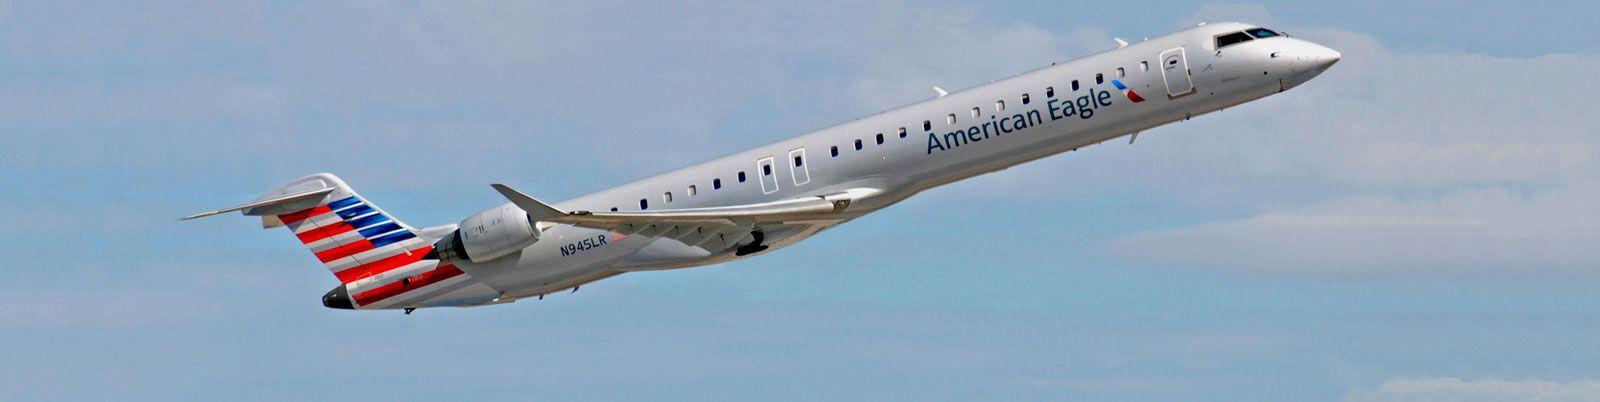 American Eagle Airlines New Logo - Mesa Airlines US Airways Express / American Eagle Airline Information